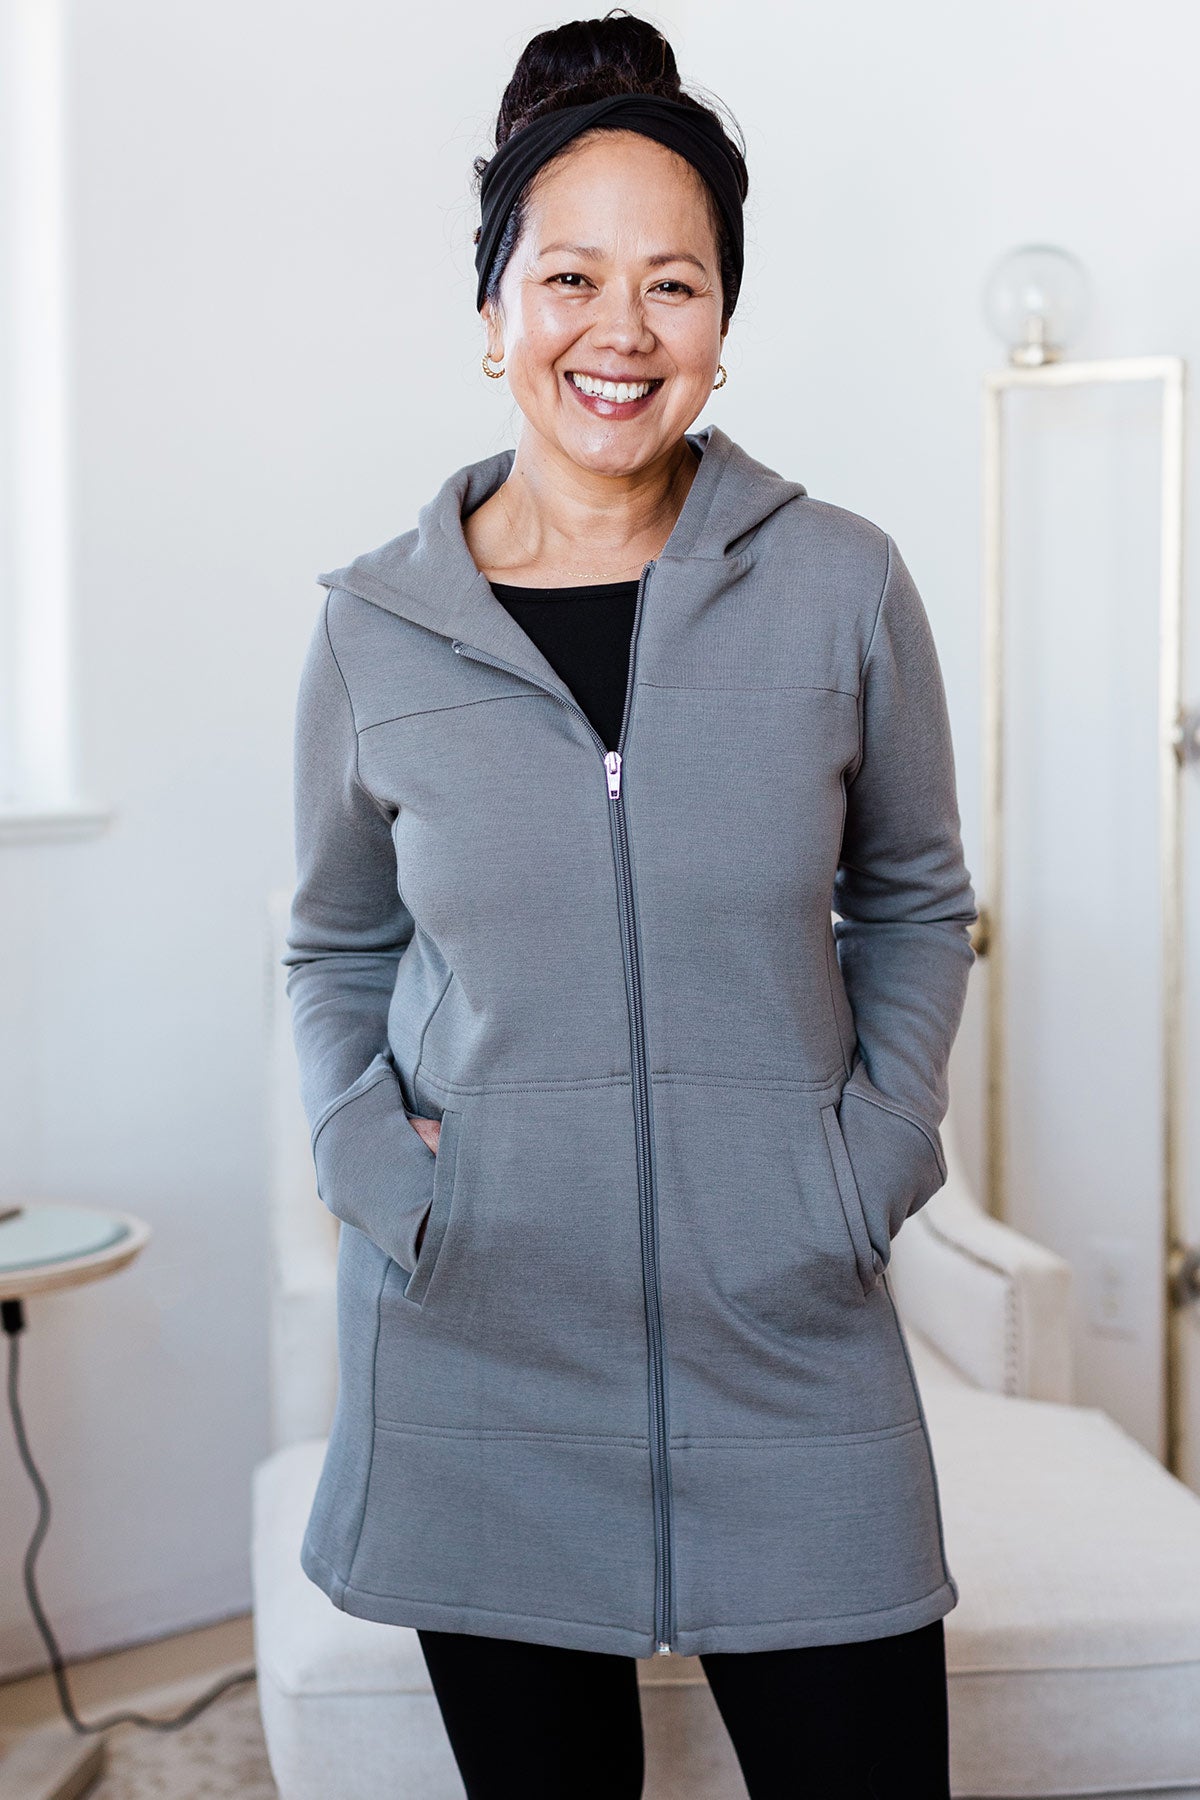 A woman standing and smiling with both hands in her jacket pockets, wearing Yala Jemma Zip-Up Long Bamboo and Organic Cotton Sweatshirt Hooded Jacket in Space Grey